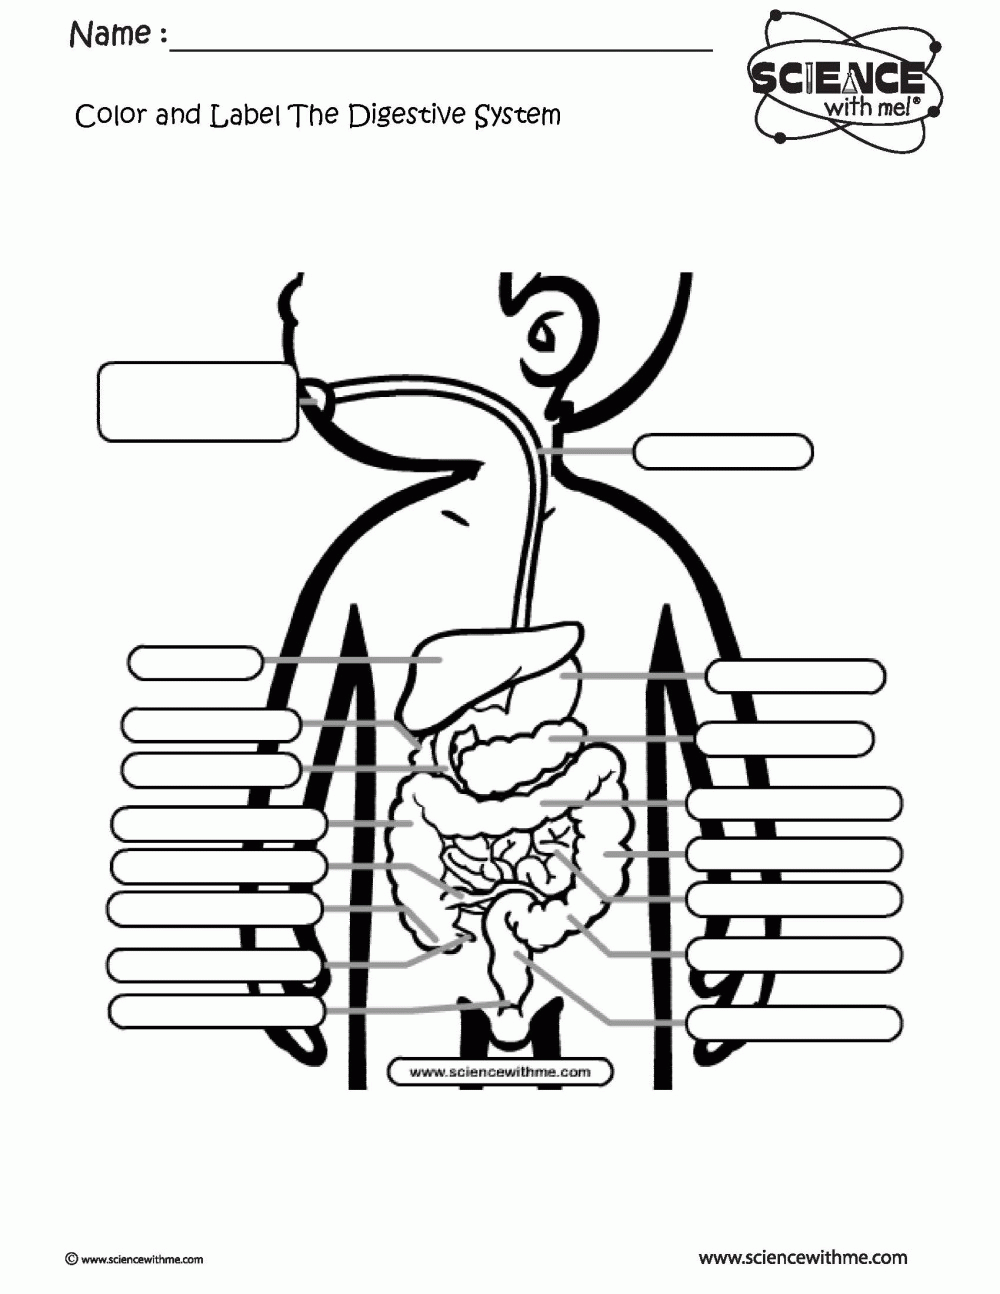 coloring-page-for-digestive-system-coloring-home